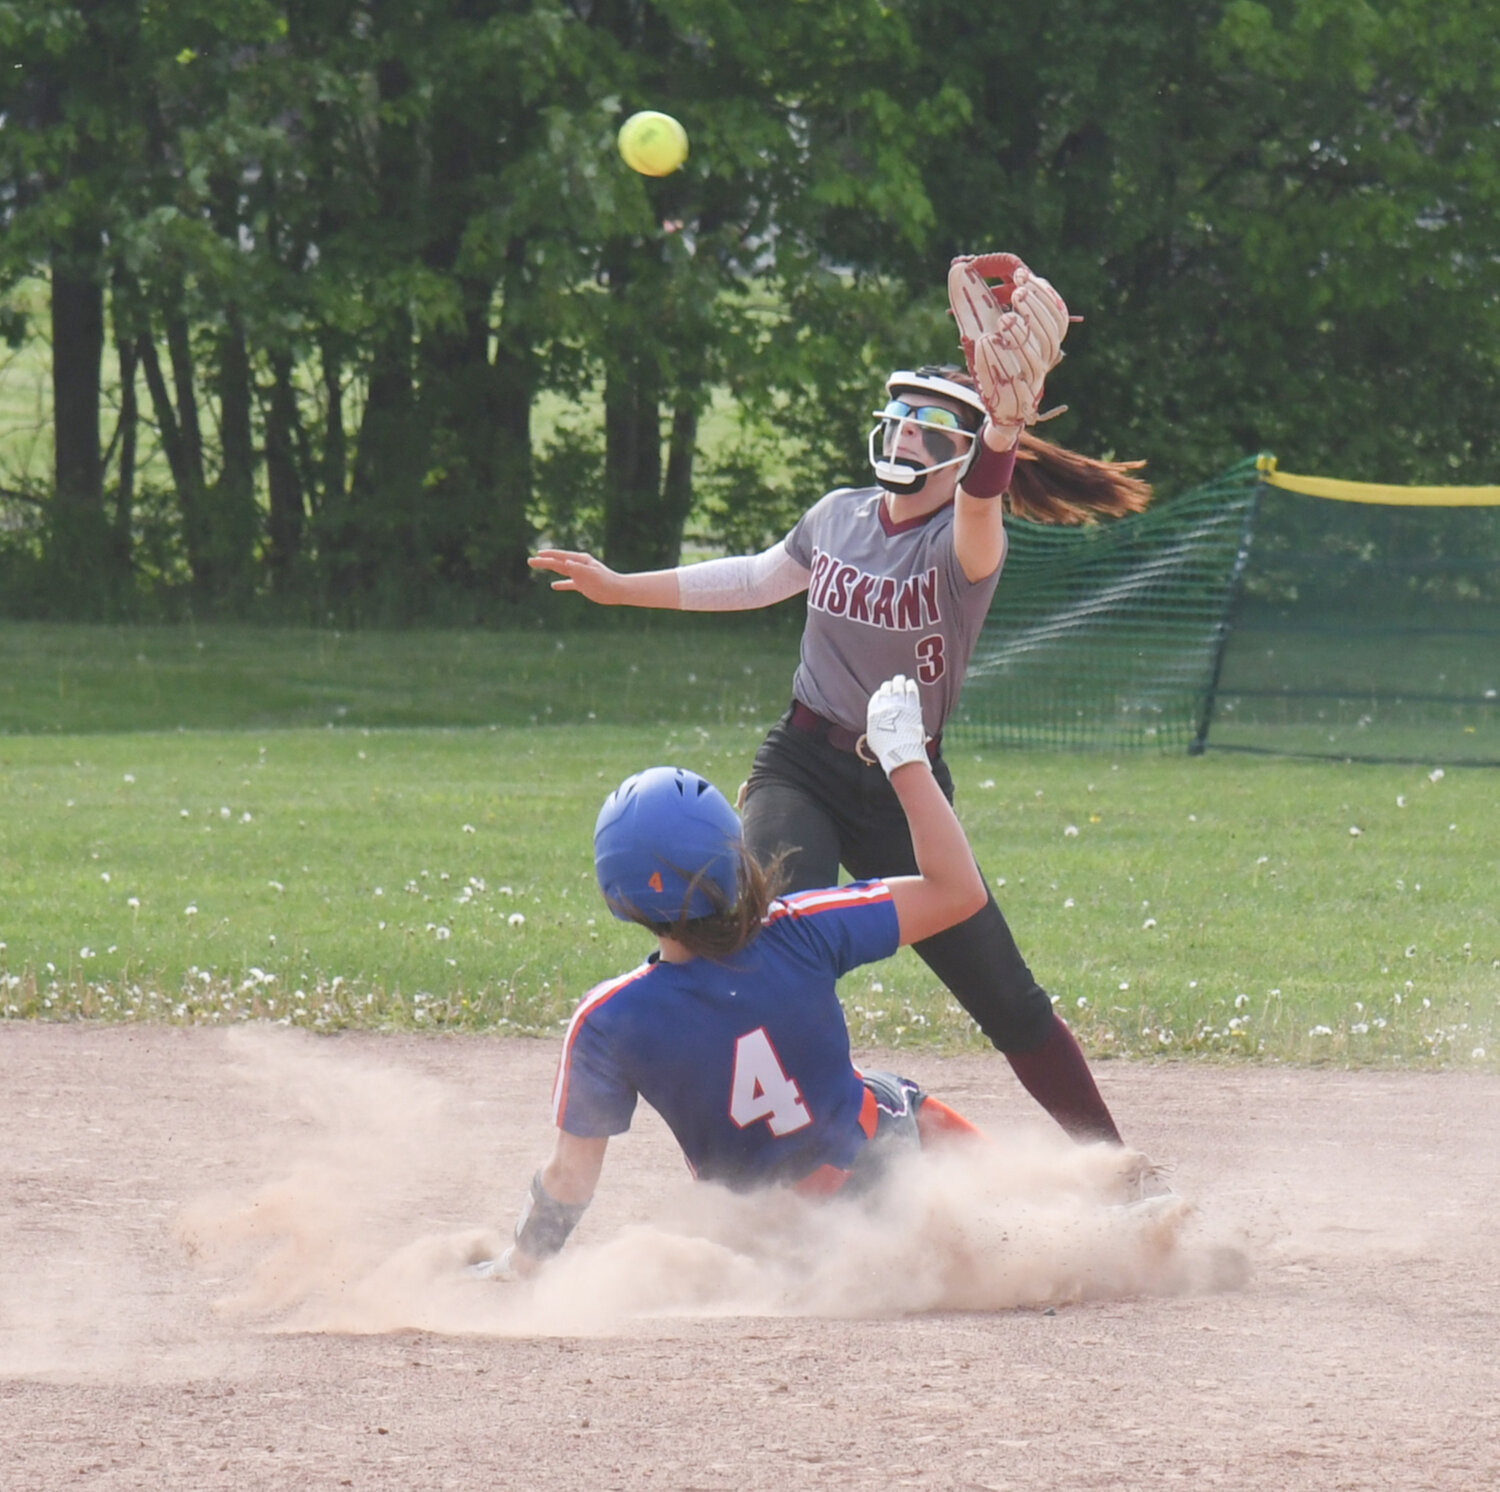 Oriskany's Brooke Matys waits for a throw as Poland's Madison Haver slides into second base on Friday in Oriskany. Haver was safe on the play.